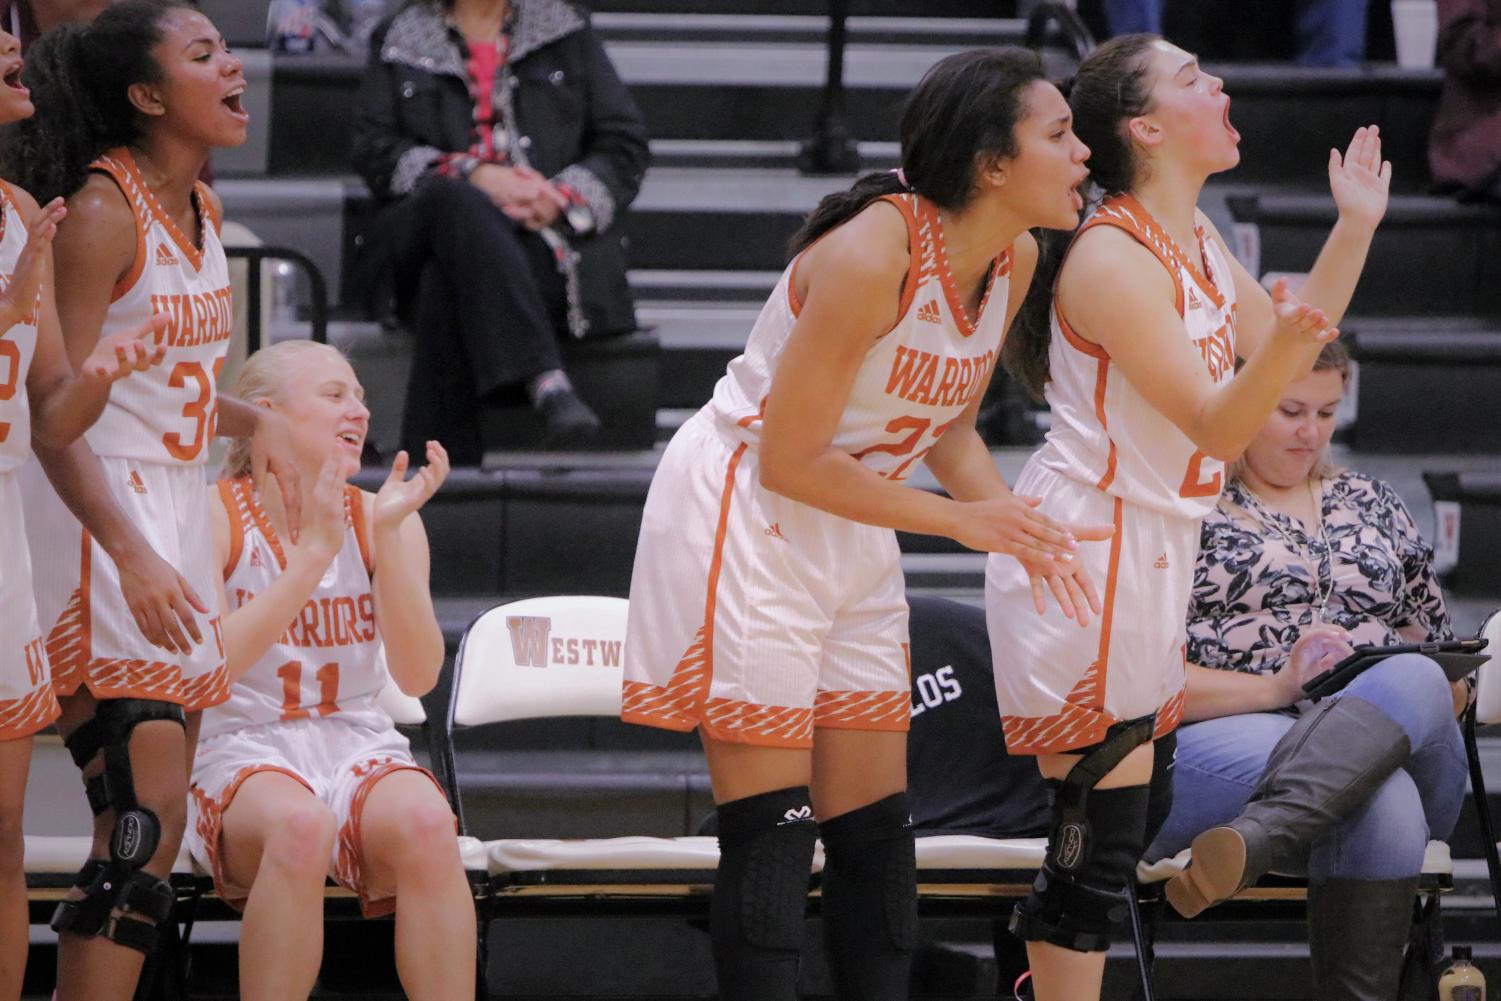 Varsity+Girls+Basketball+Conquers+Hutto+in+79-30+Blowout